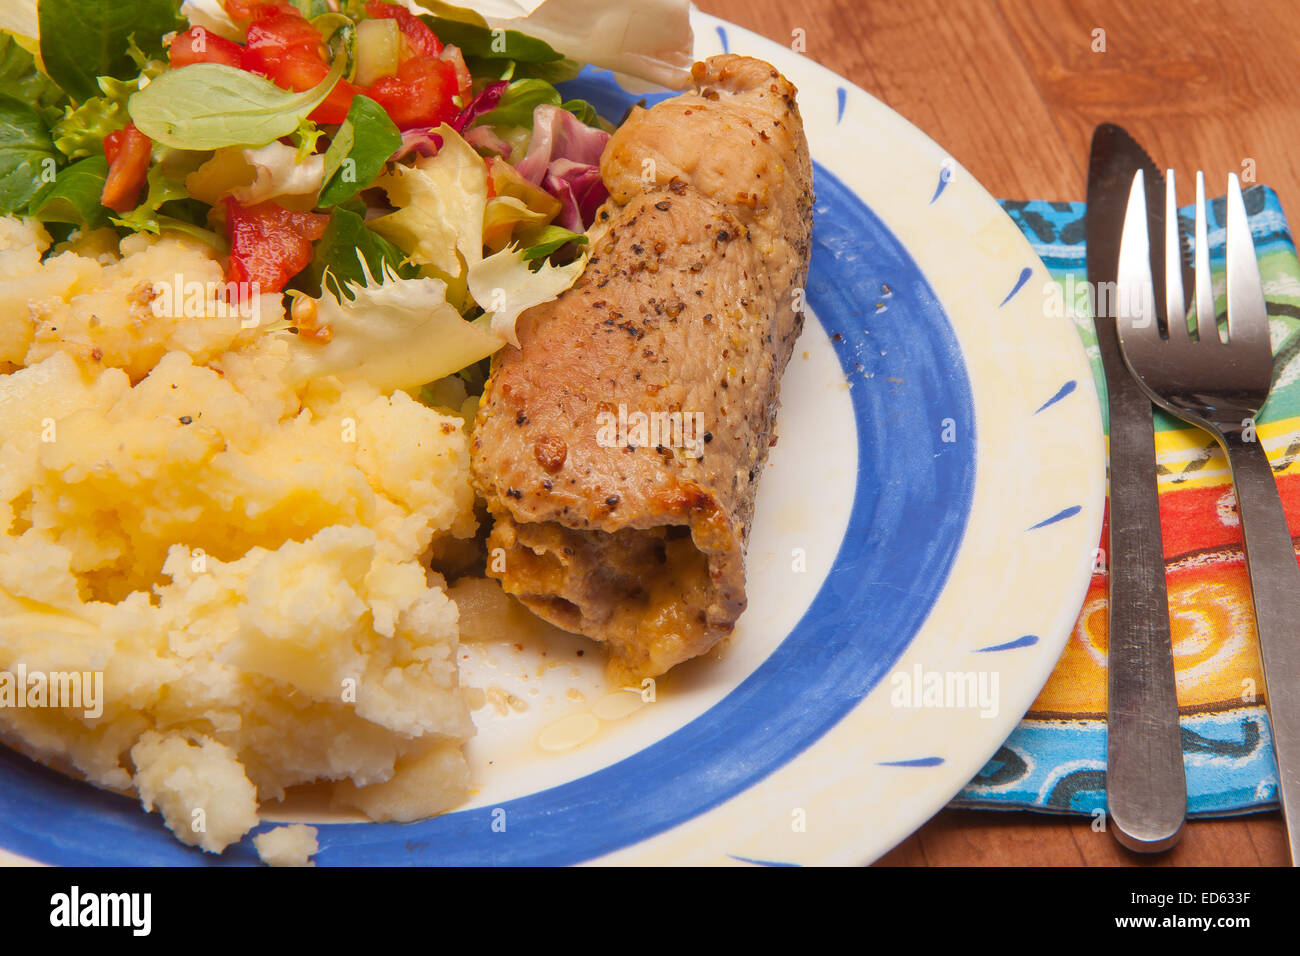 Dinner served. Meat rolls with potatoes and salad. Stock Photo